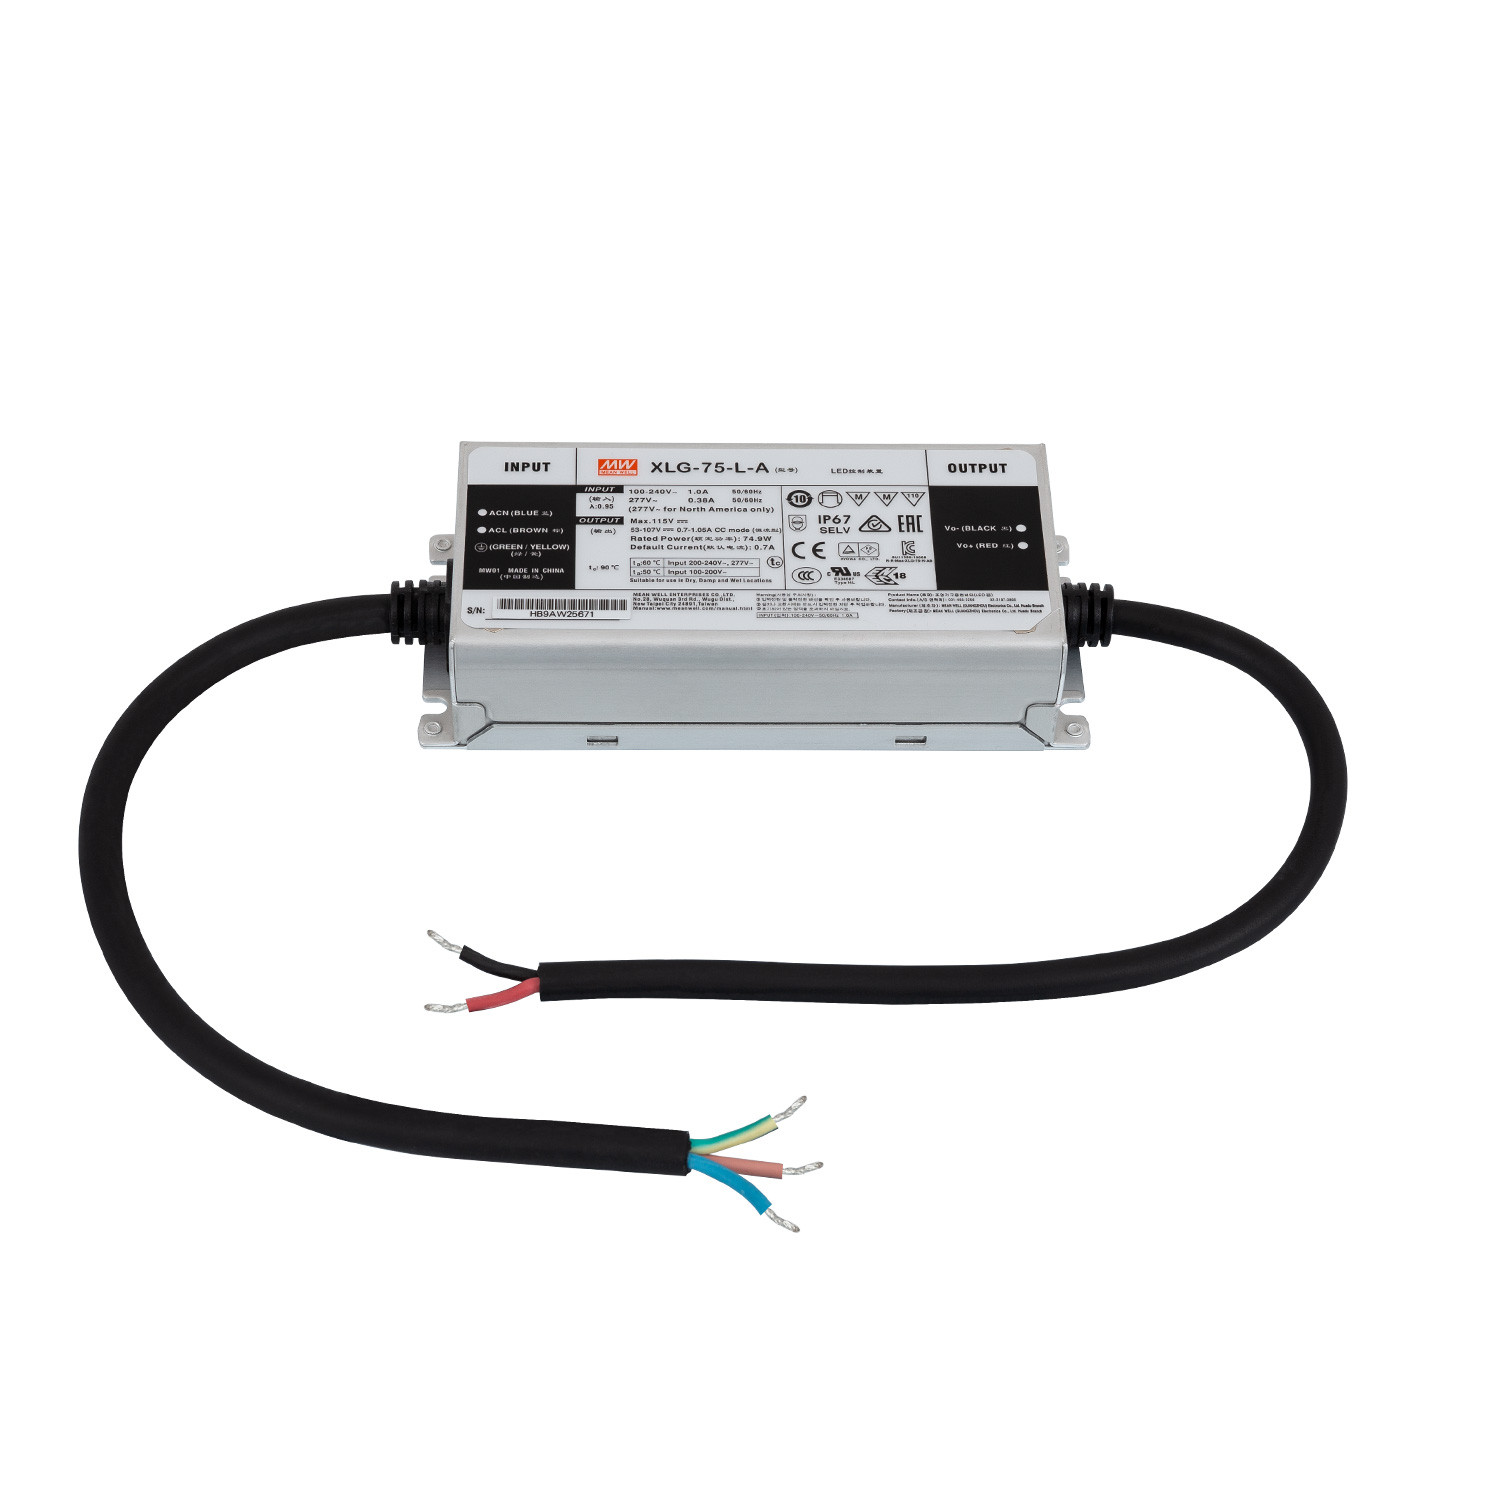 Product van Driver MEAN WELL 100-305V Uitgang 53-107V 700-1050mA 75W XLG-75-L-A IP67